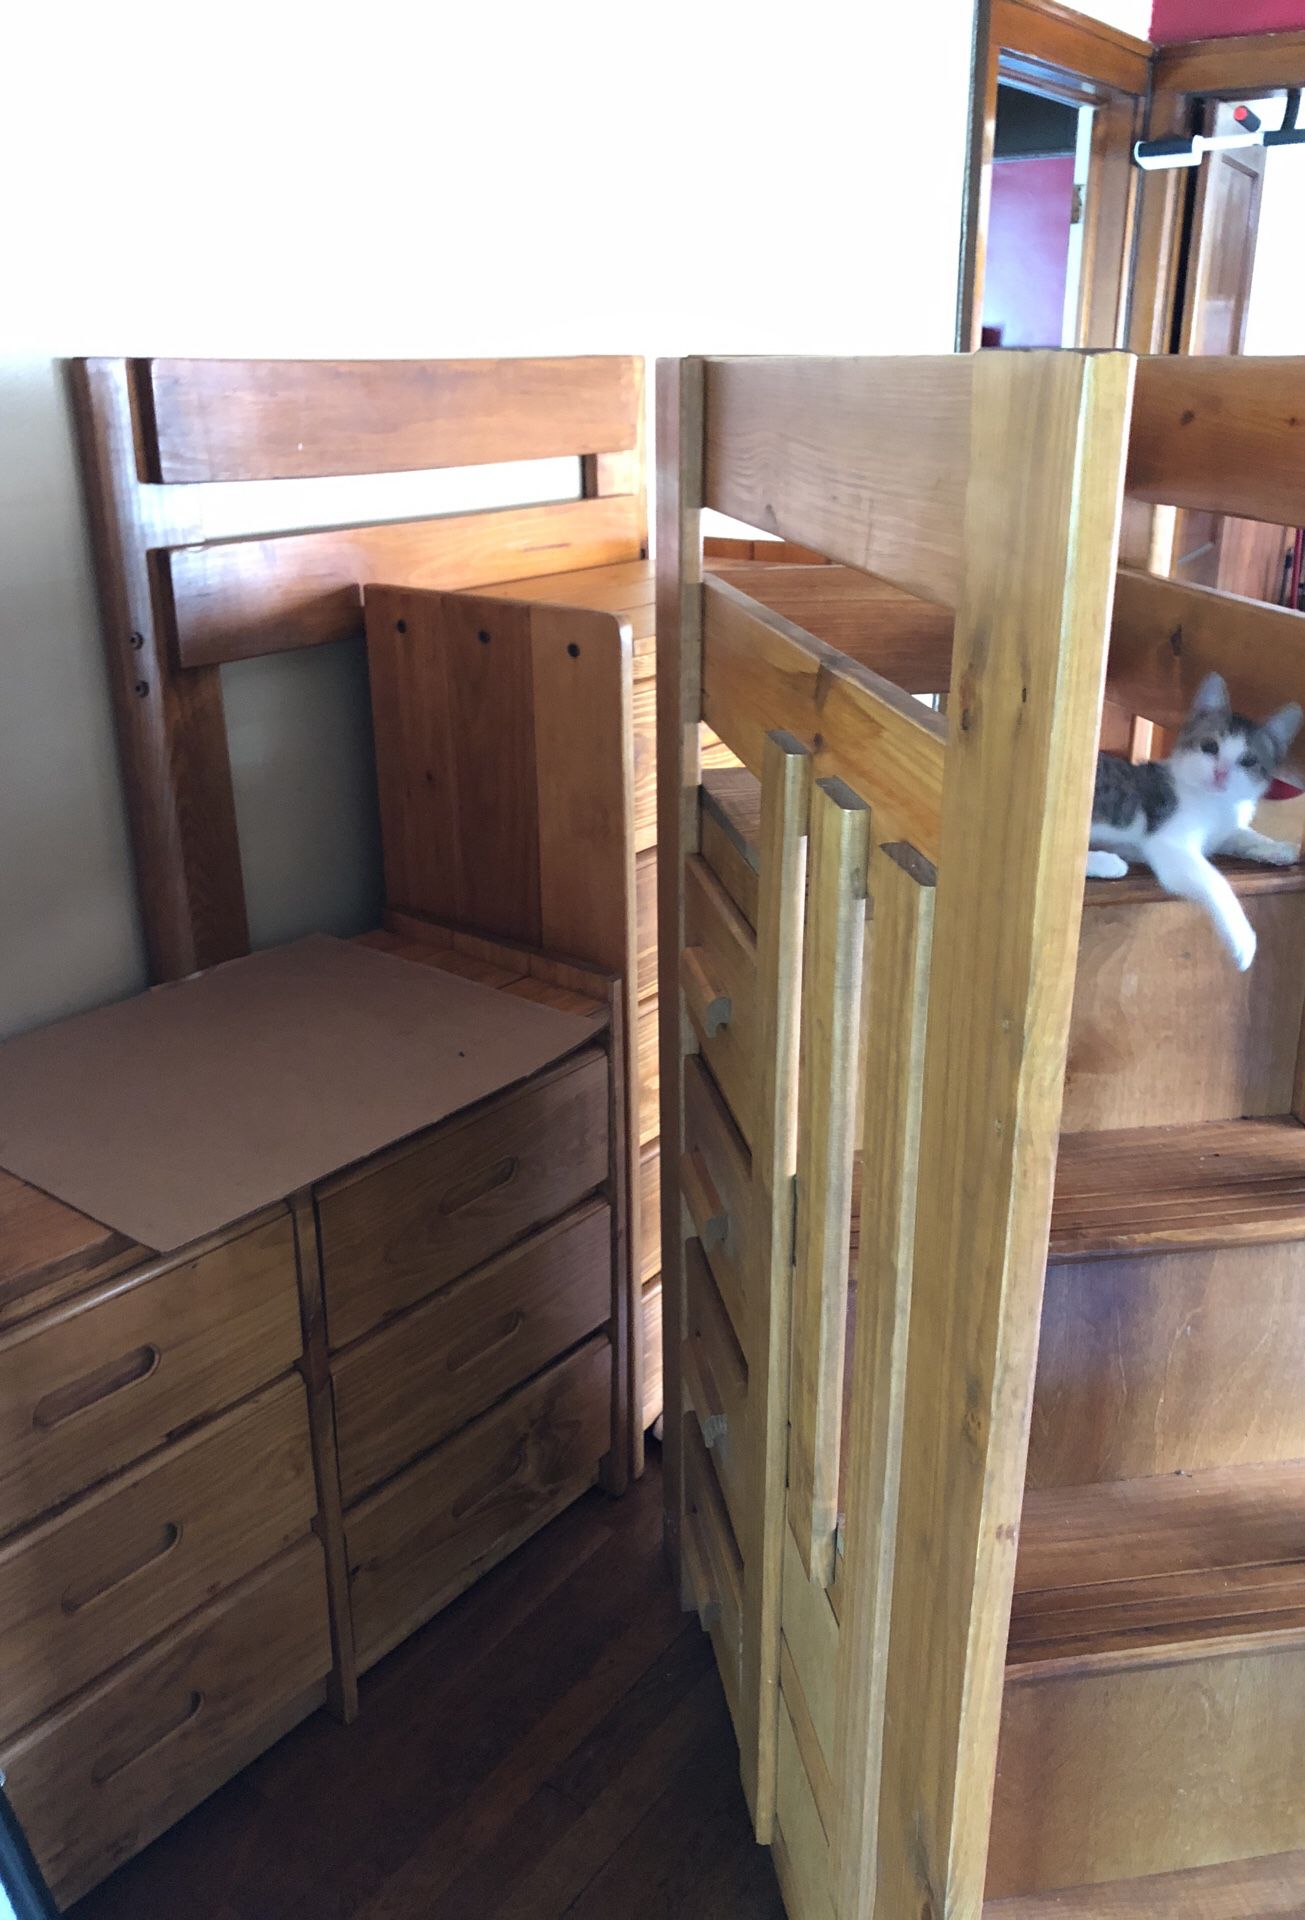 Bunk bed and dresser sets, beds are included